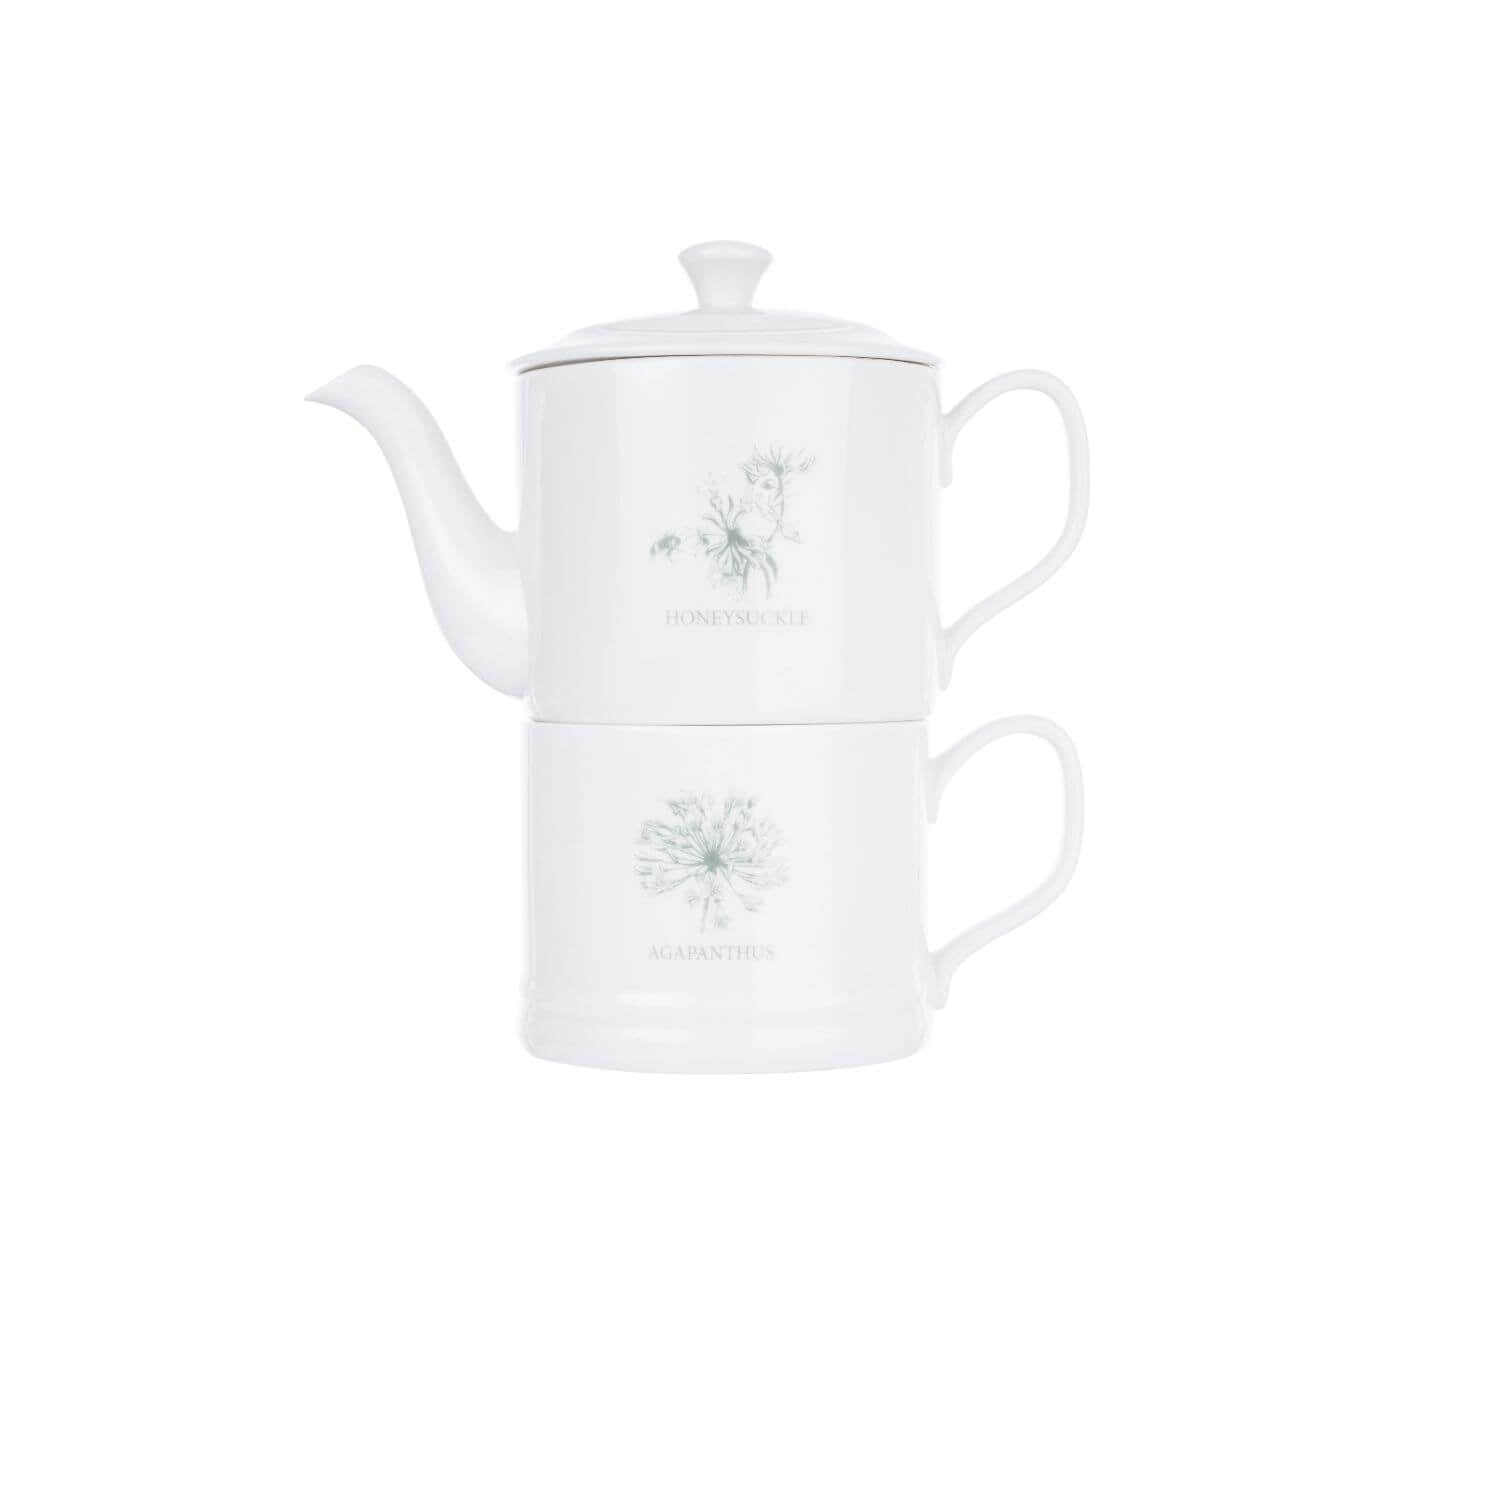 Mary Berry English Garden Tea For One Teapot Set Flowers